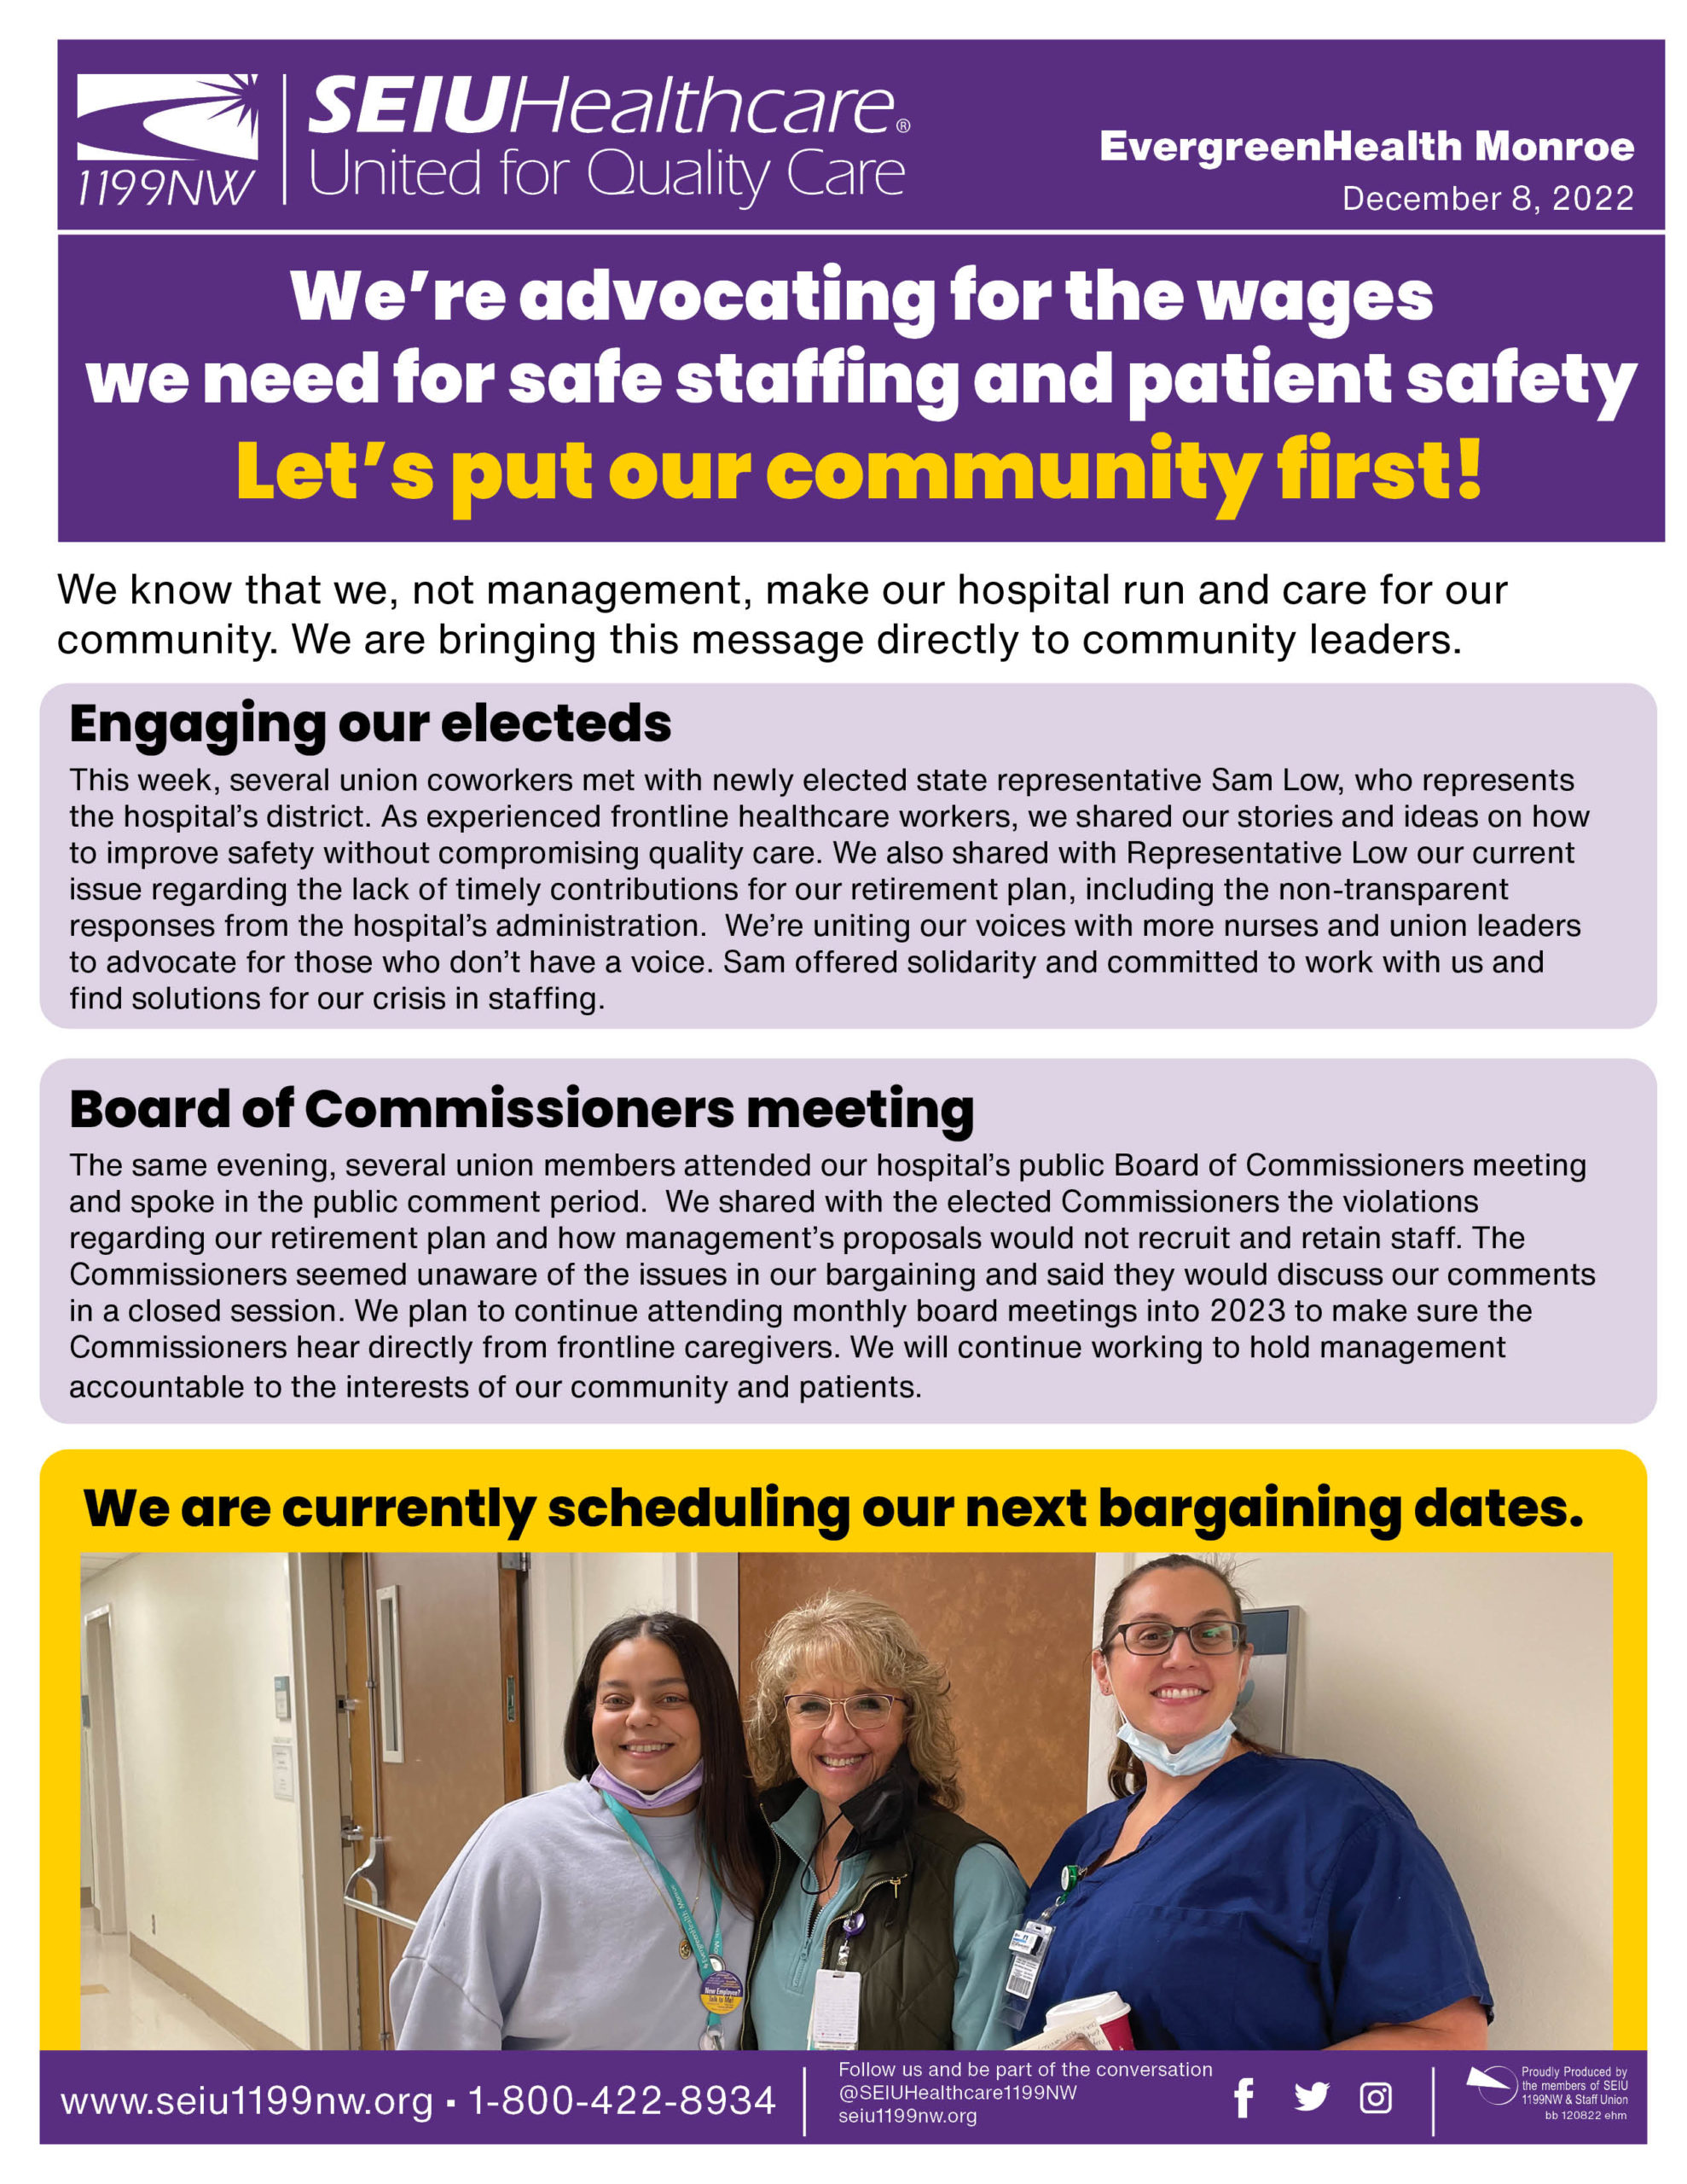 We’re advocating for the wages we need for safe staffing and patient safety Let’s put our community first!